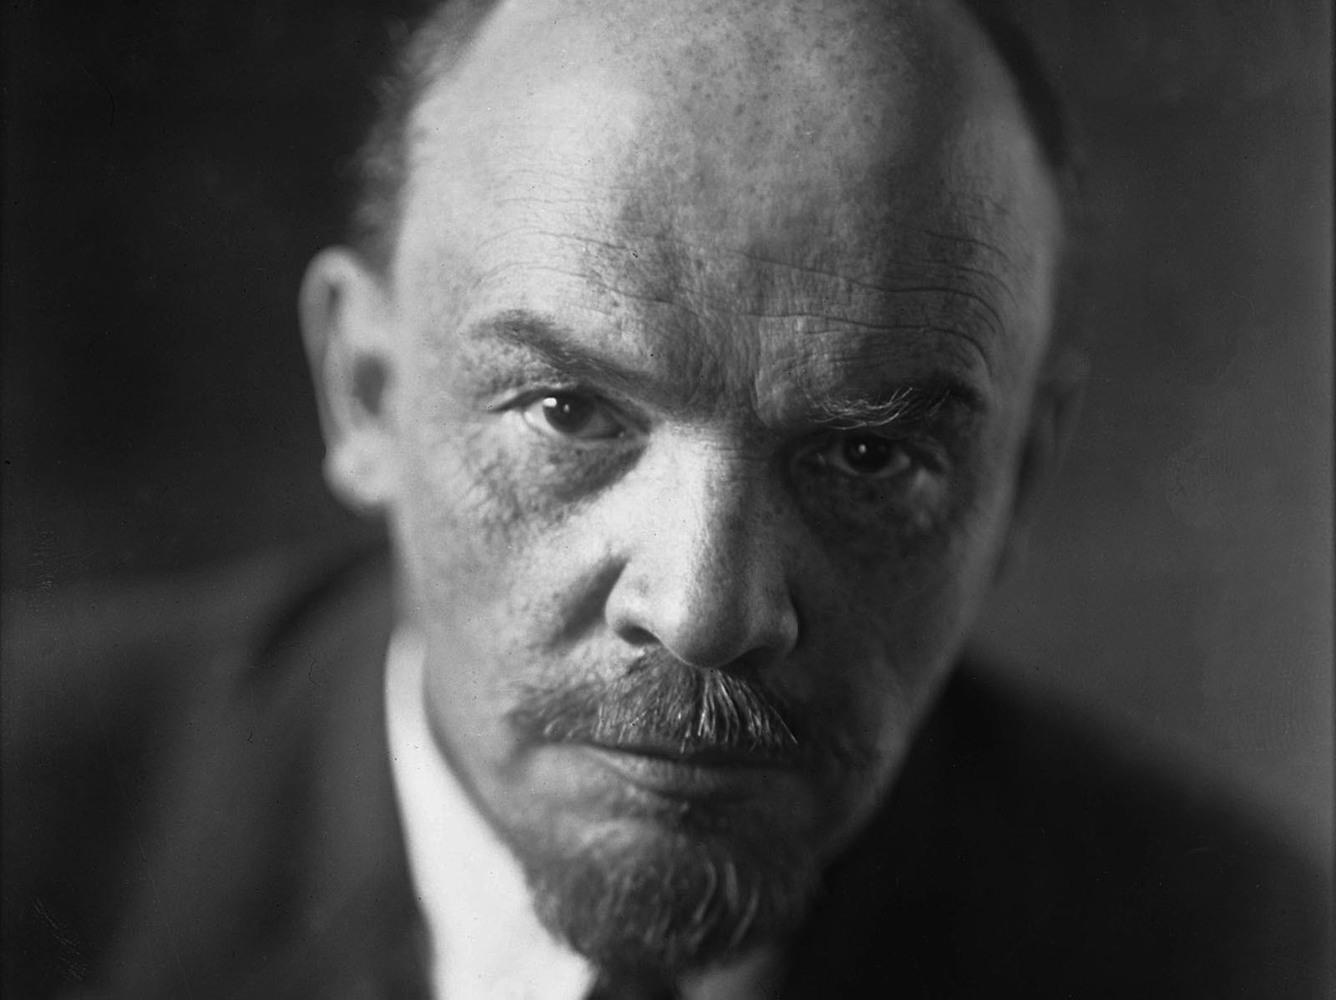 Vladimir Lenin died 100 years ago: photo of the creator of the world's first socialist state